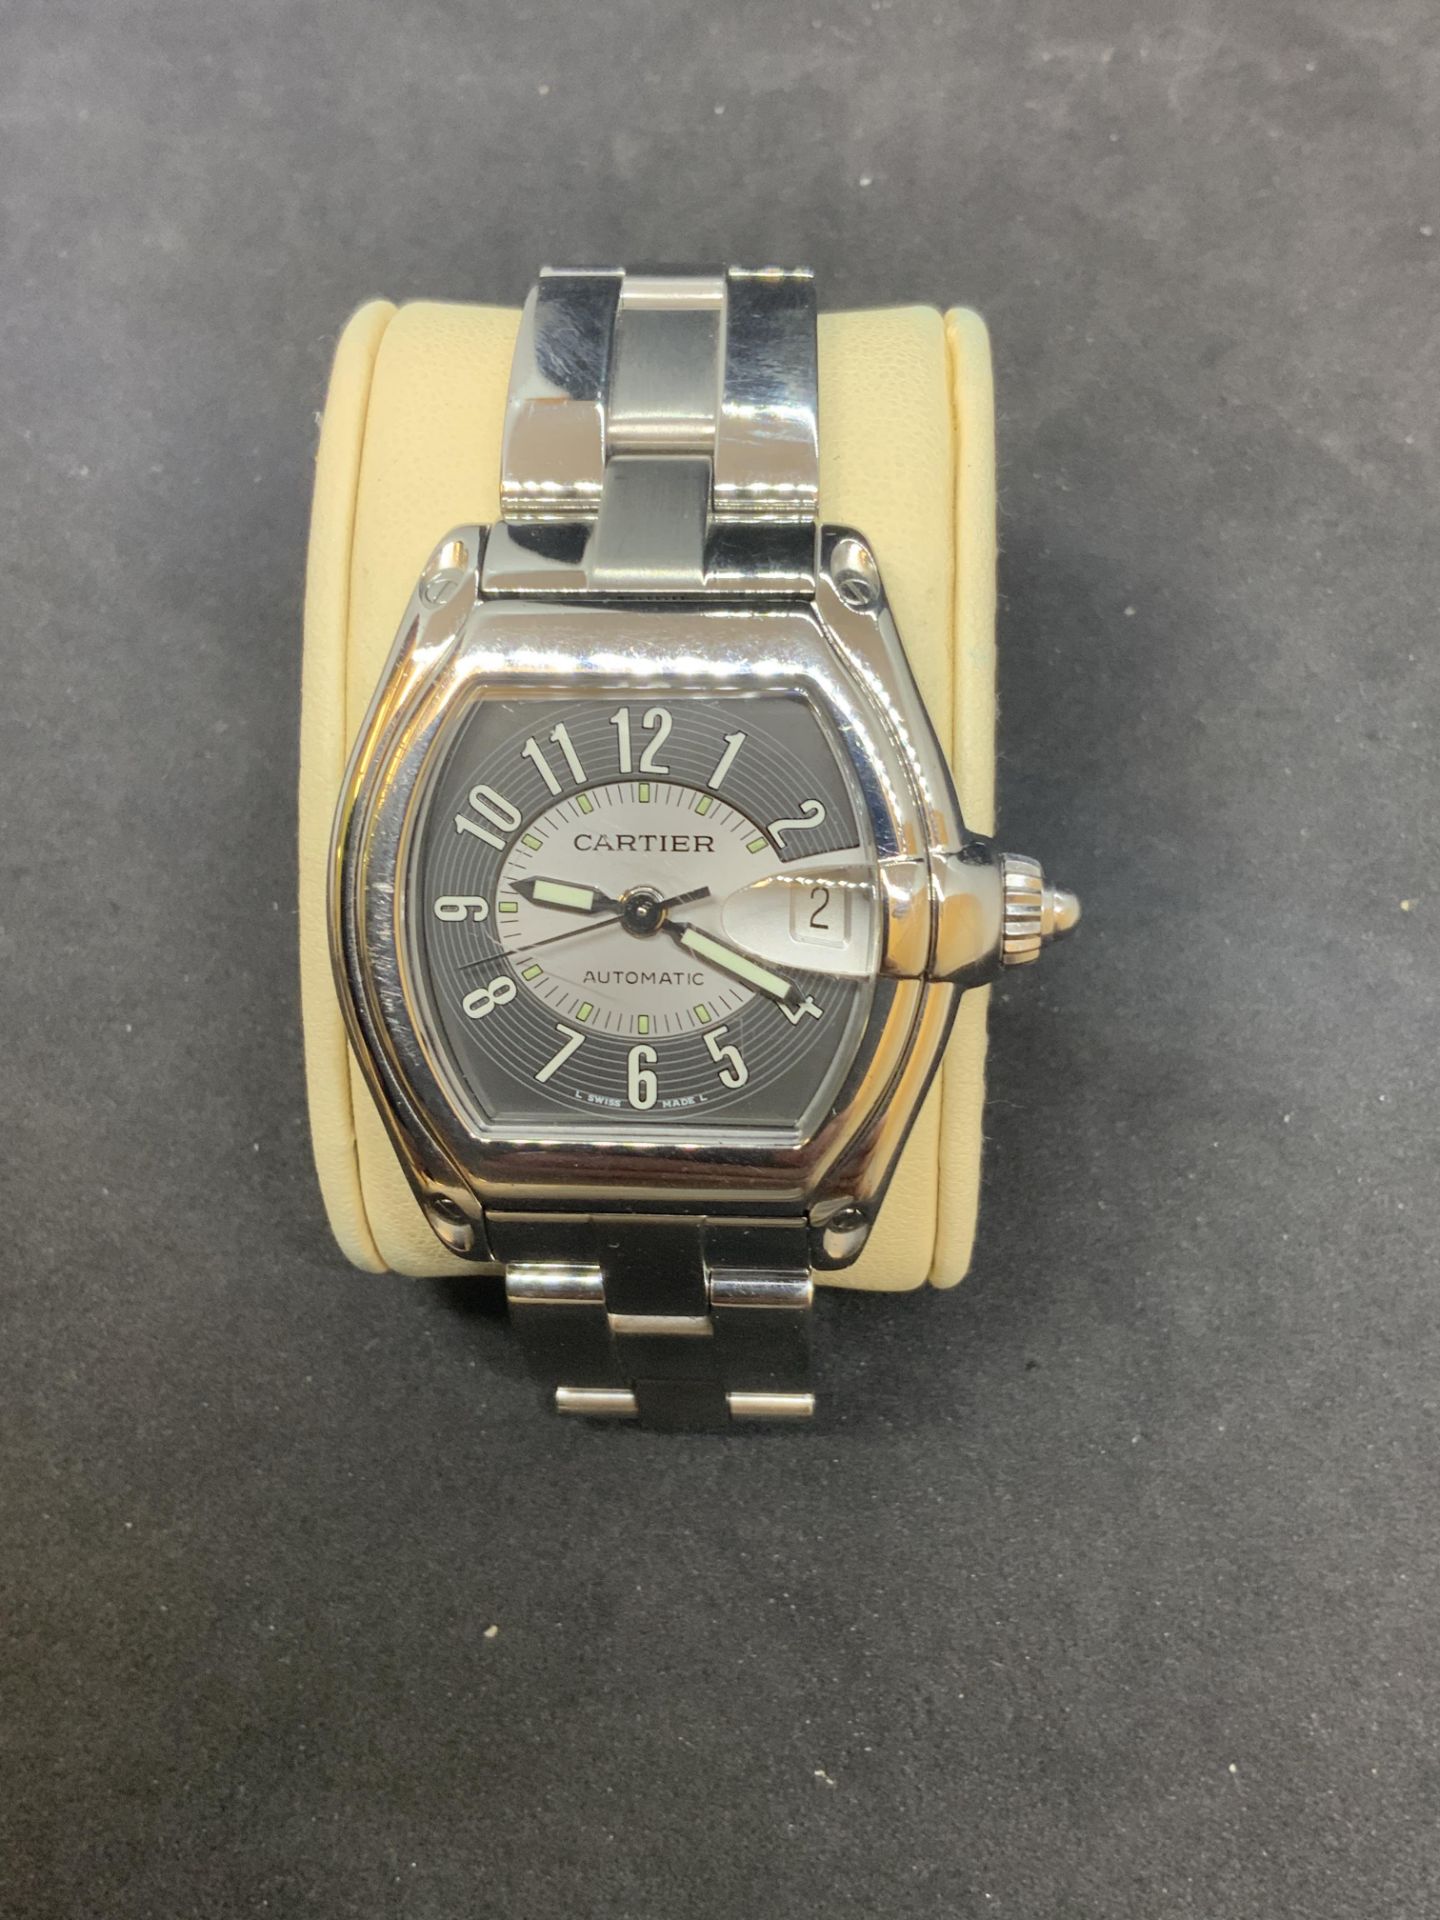 Cartier Roadster 2510 Automatic Stainless Steel 37mm - Image 7 of 8